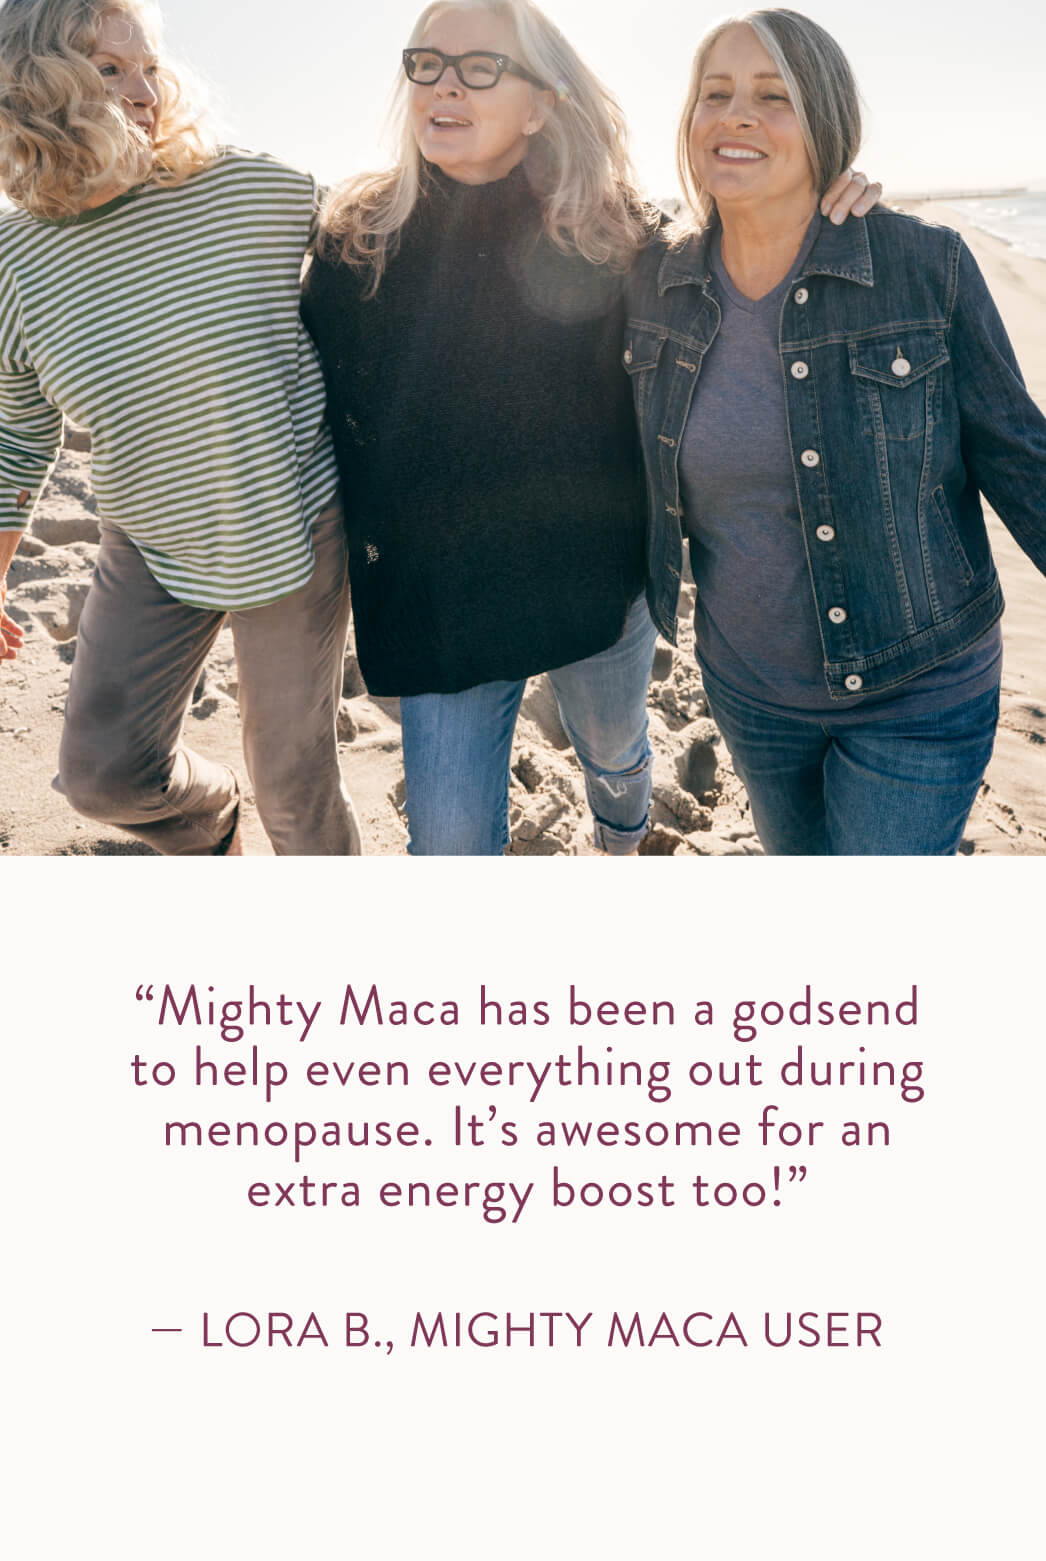 "Mighty Maca has been a godsend to help even everything out during menopause. It's awesome for an extra energy boost too!" Lora B., Mighty Maca User